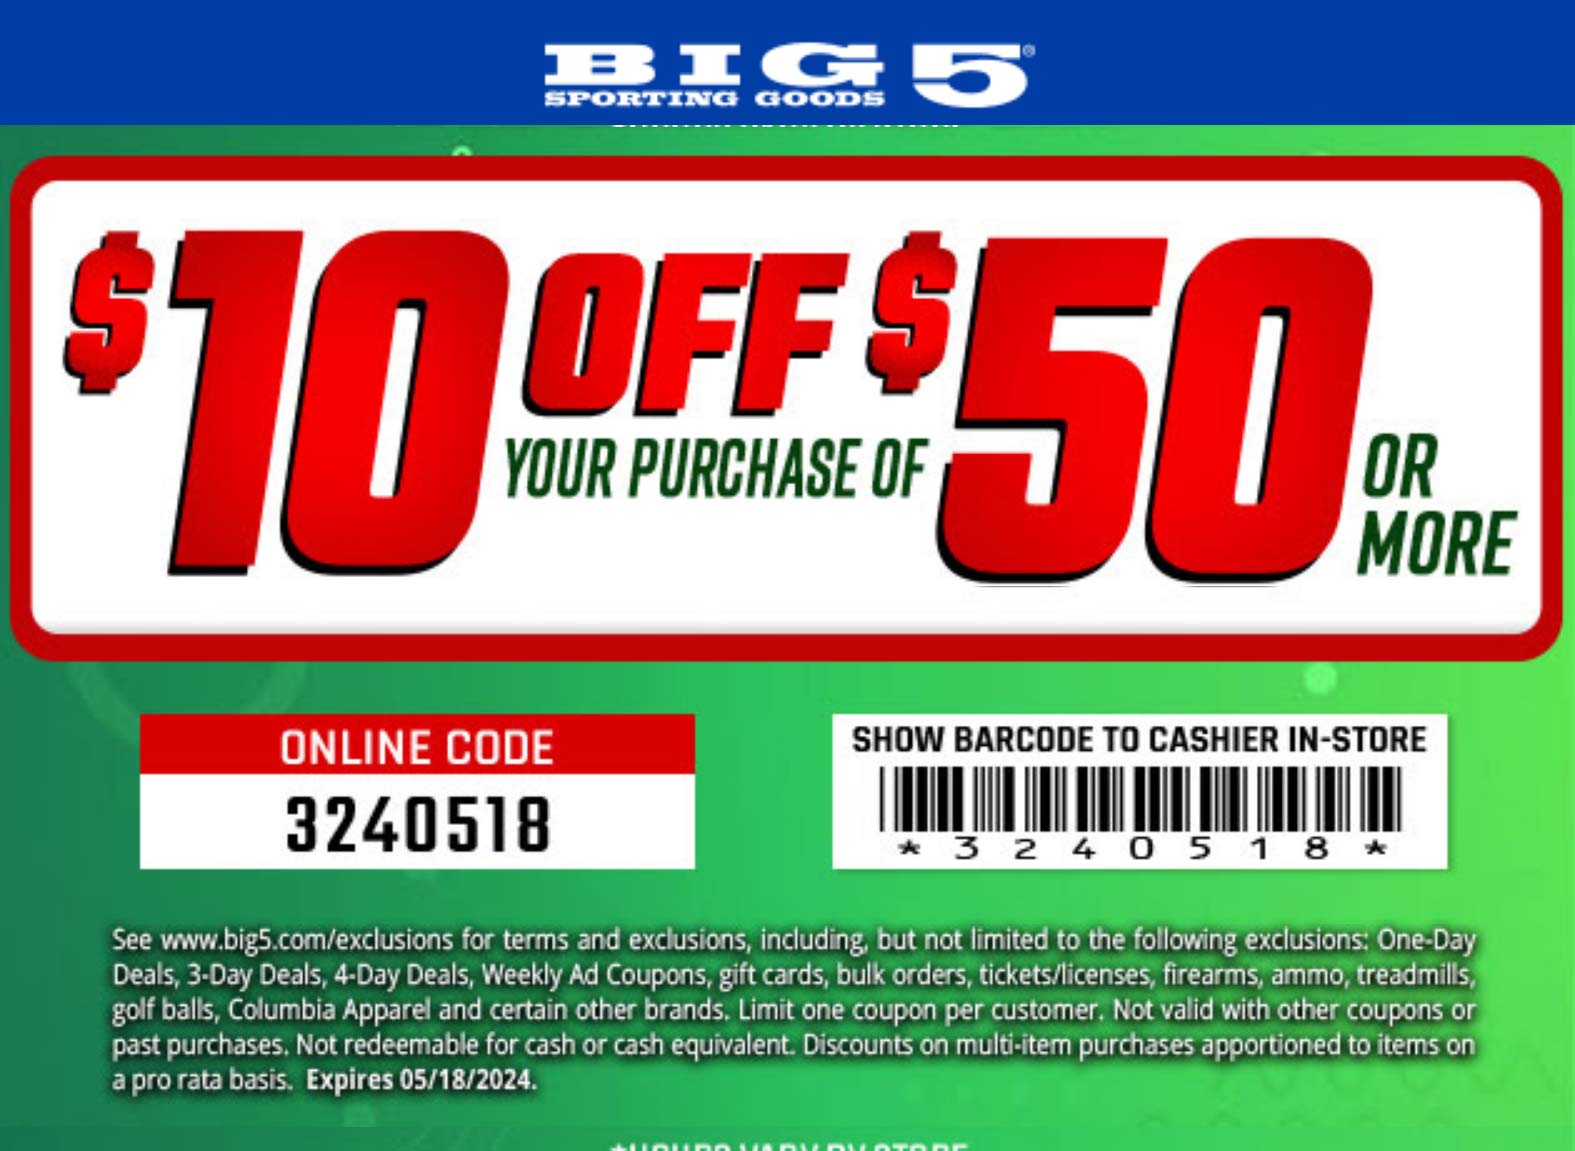 Big 5 stores Coupon  $10 off $50 today at Big 5 sporting goods, or online via promo code 3240518 #big5 